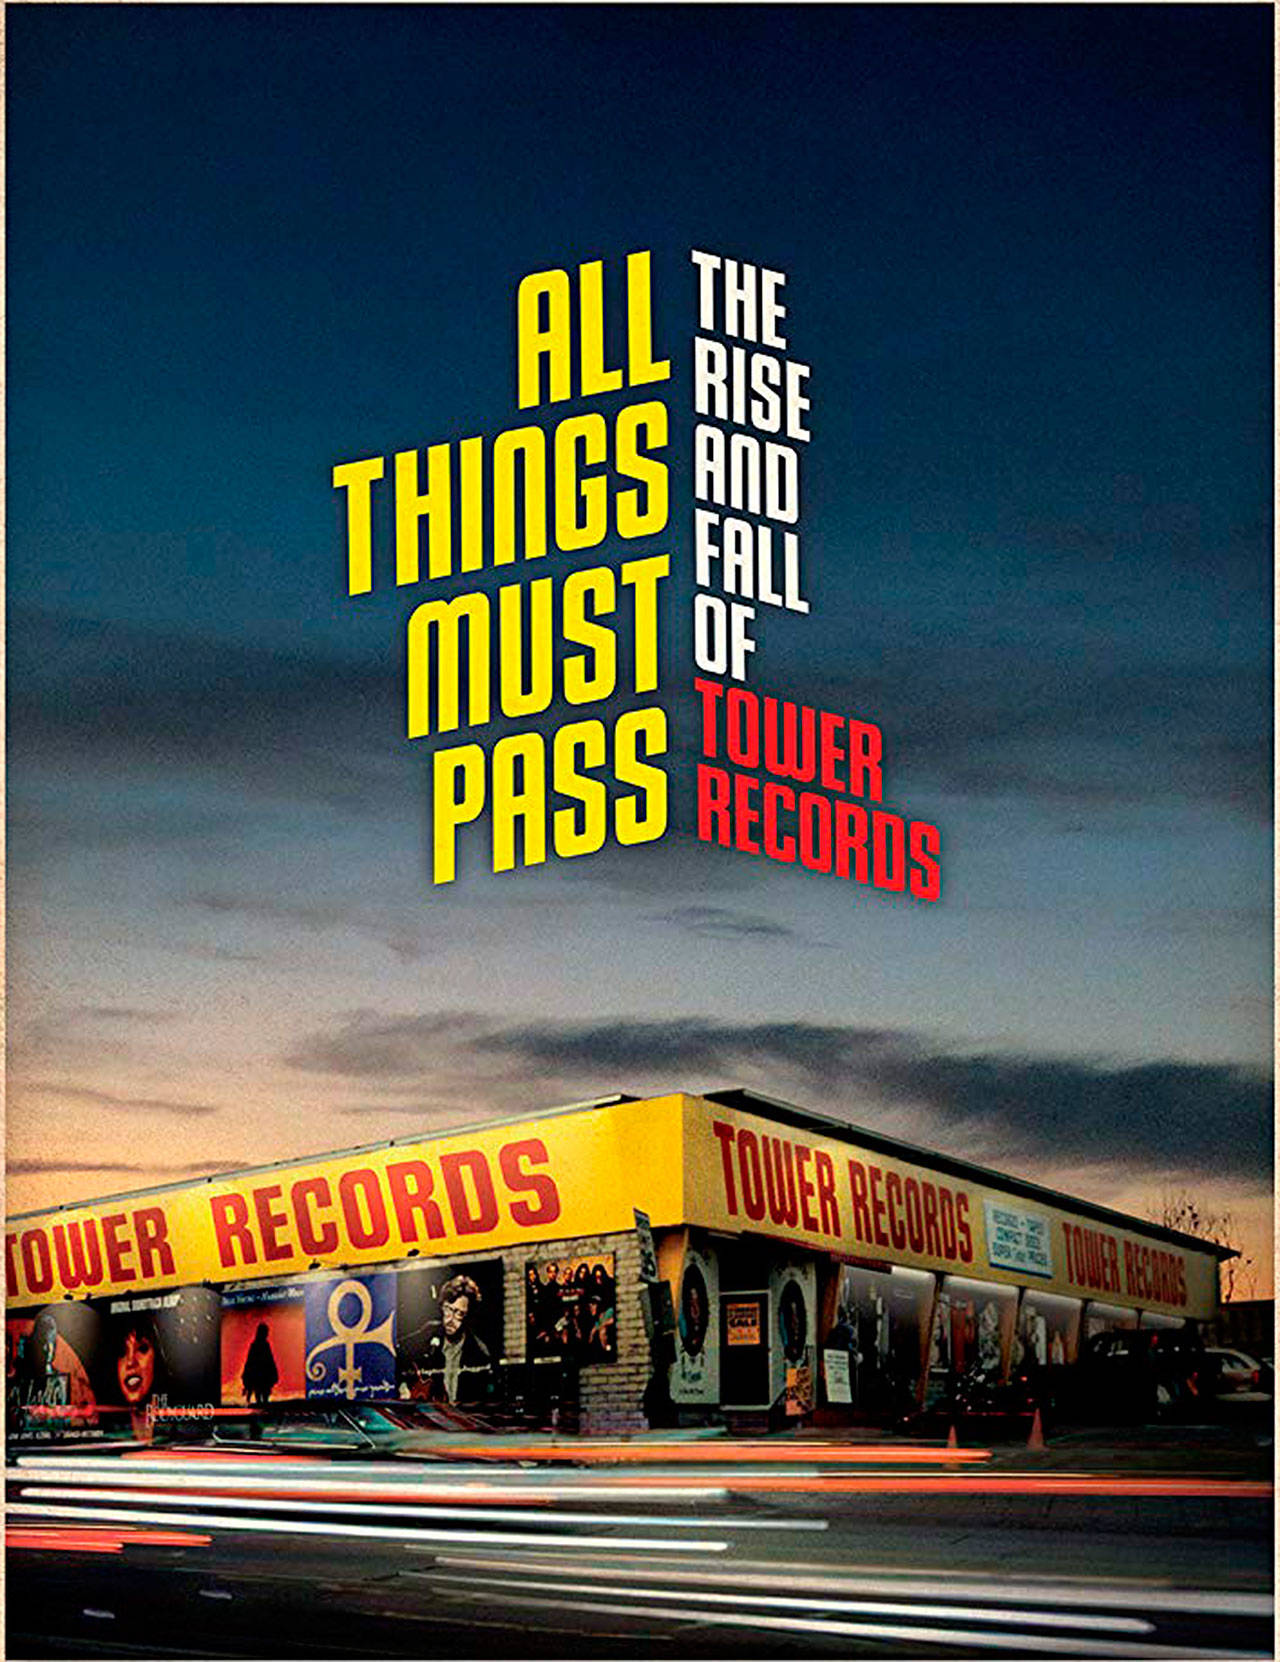 Image courtesy of the Internet Movie Database | The latest Bainbridge Island Museum of Art smARTfilm series, “Music on Film,” continues Tuesday, Sept. 17 with a screening of the 2015 documentary “All Things Must Pass: The Rise and Fall of Tower Records.”